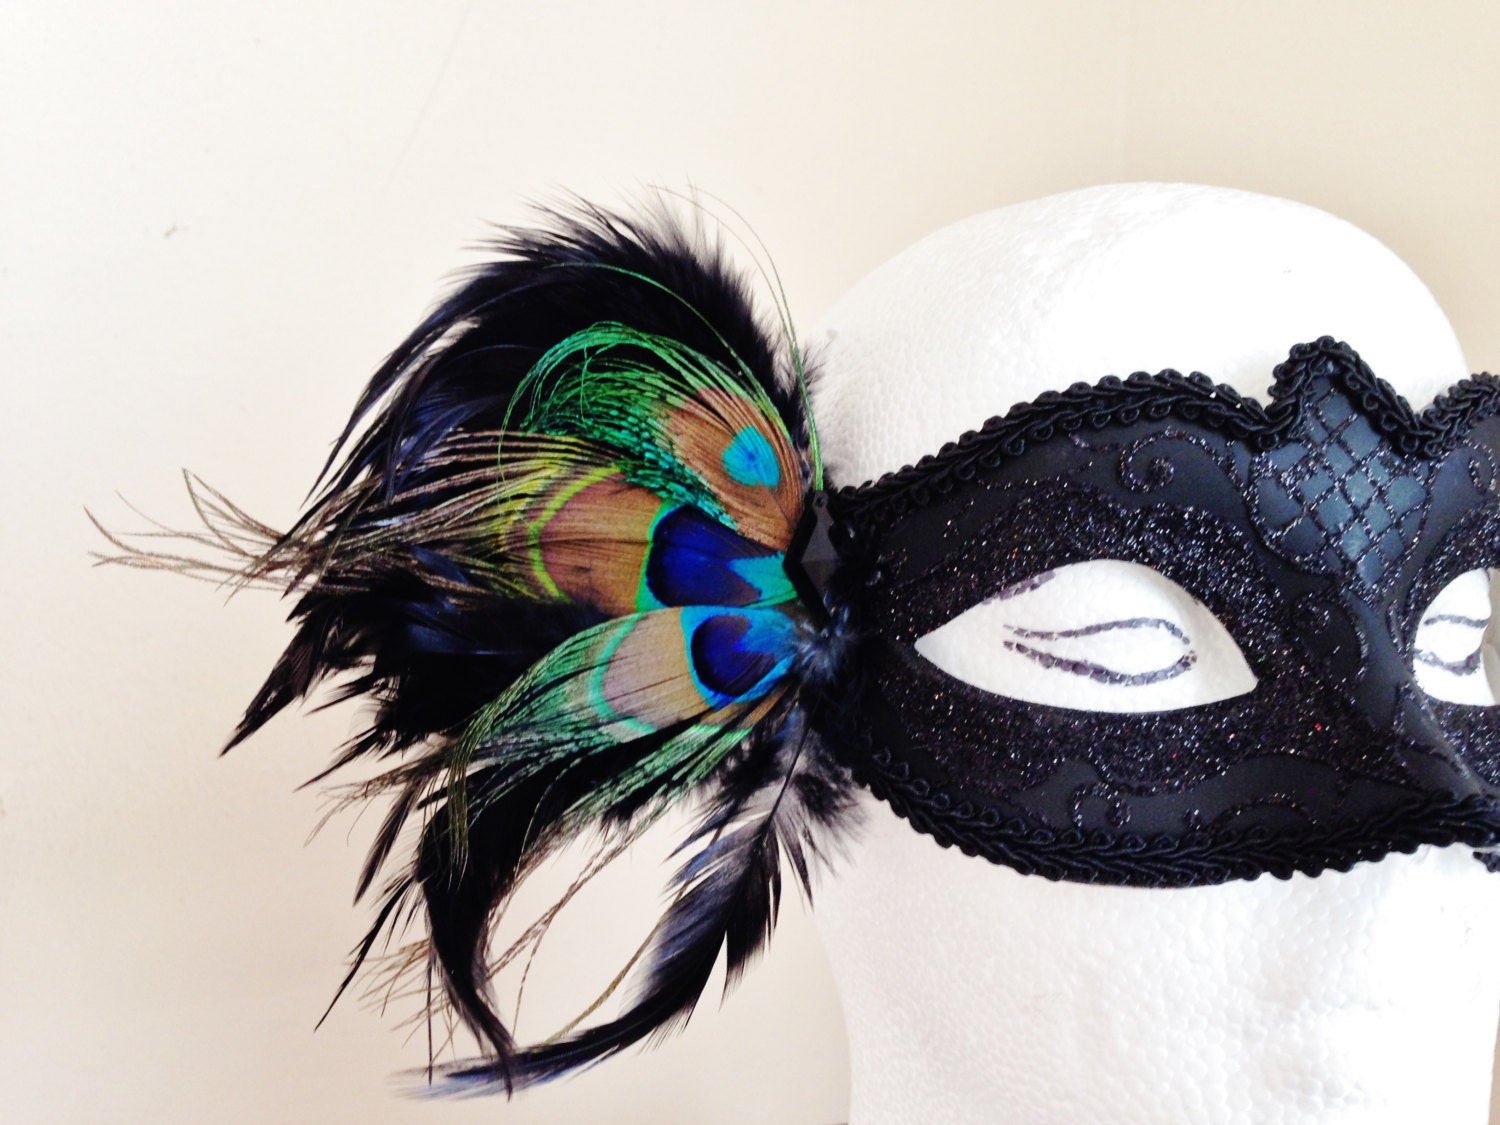 Peacock Feather Mask For Halloween Or Masquerade By Higginscreek